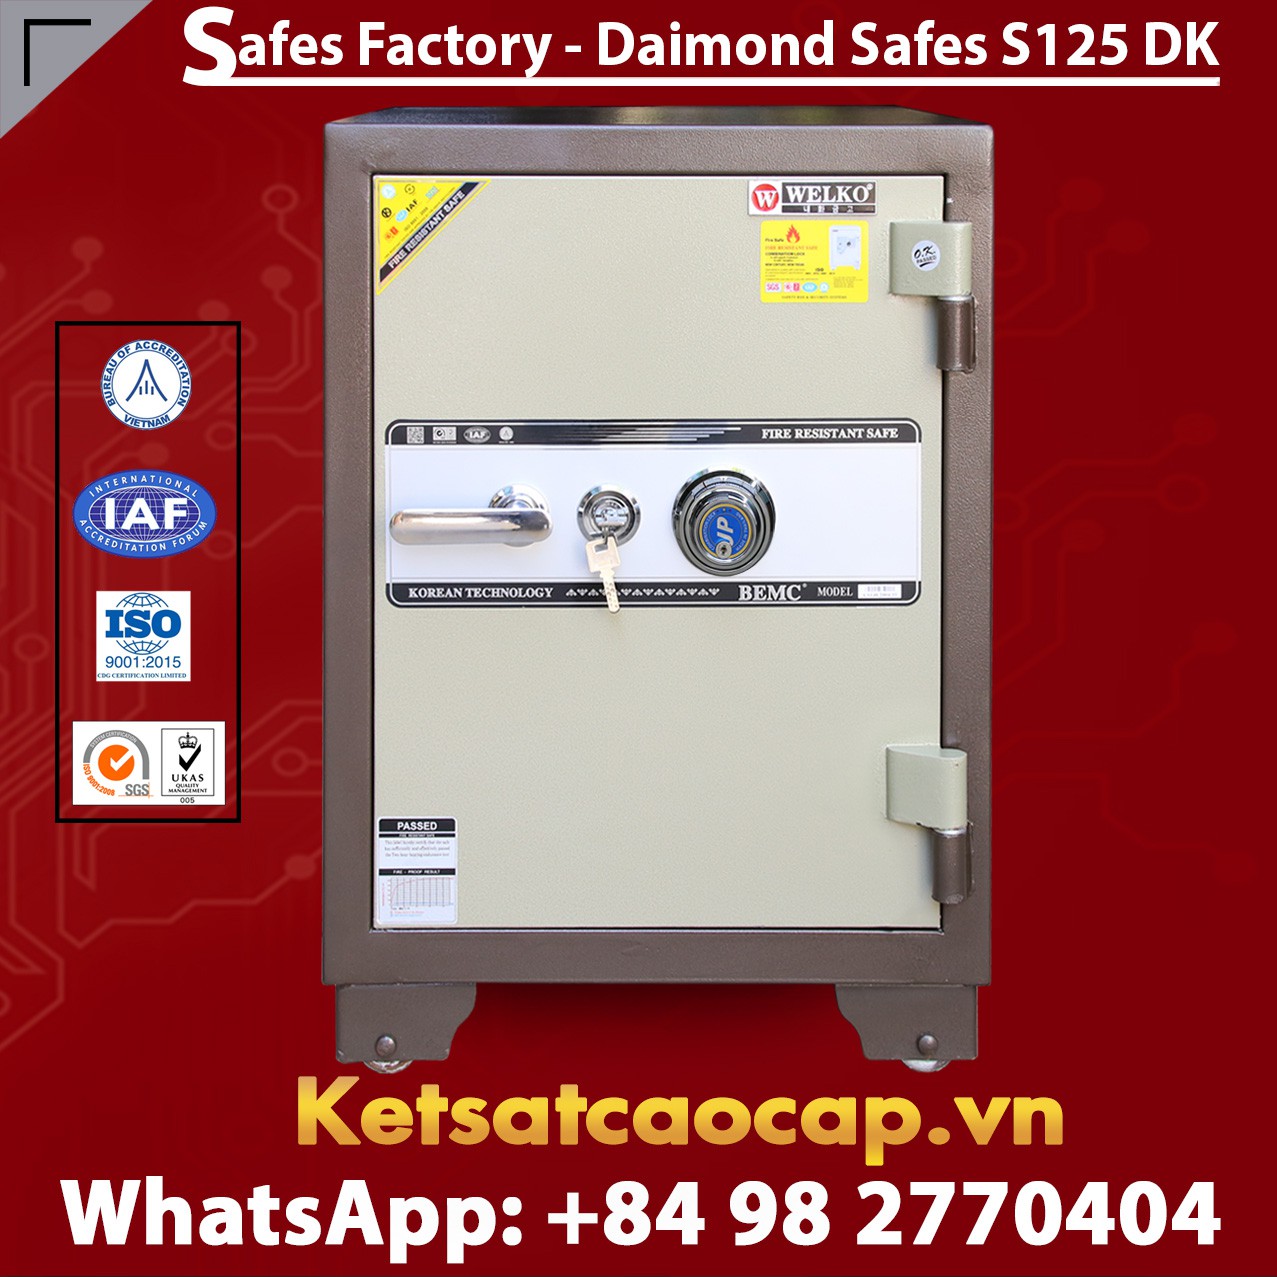 Big Safes Suppliers and Exporters manufacturer